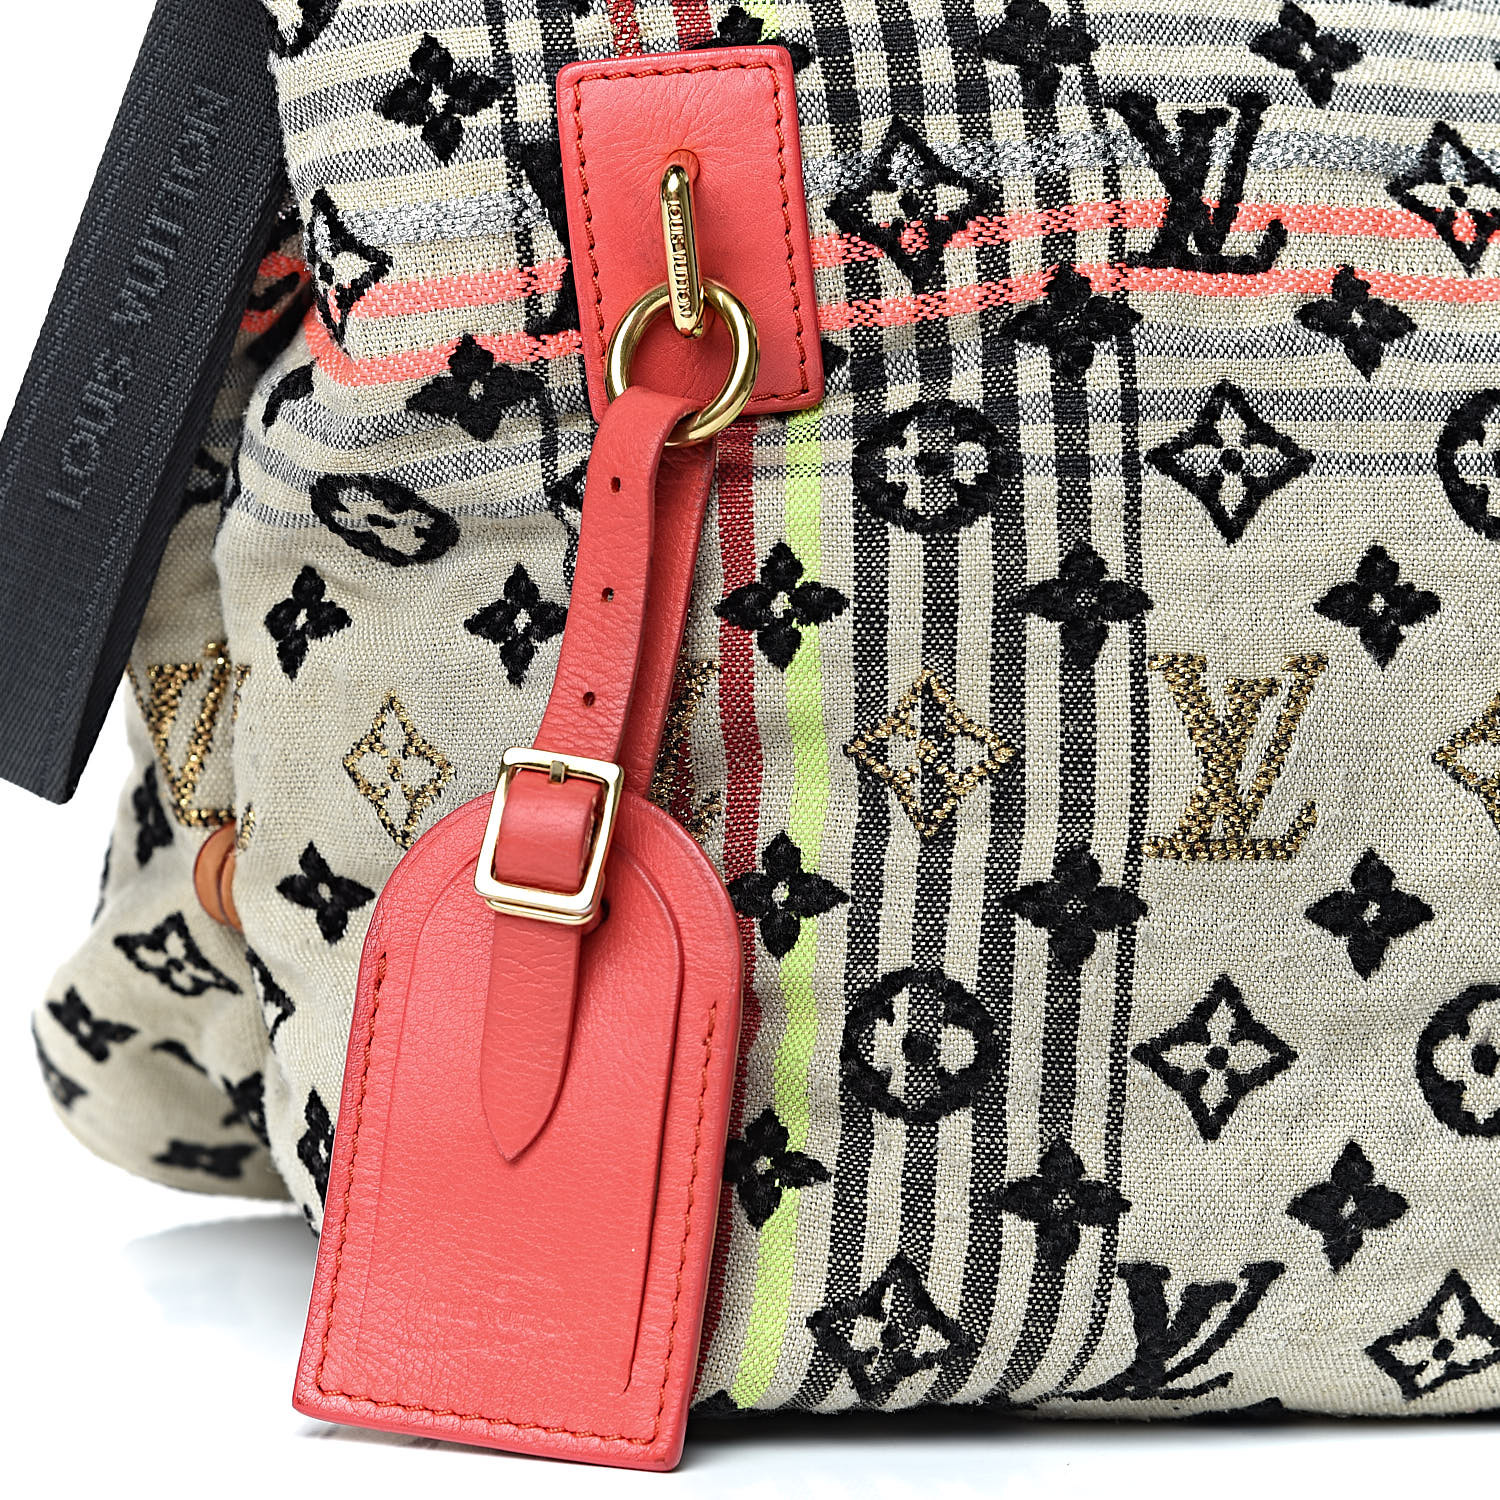 Day 44 of #stayhomewithbags is this limited edition @louisvuitton